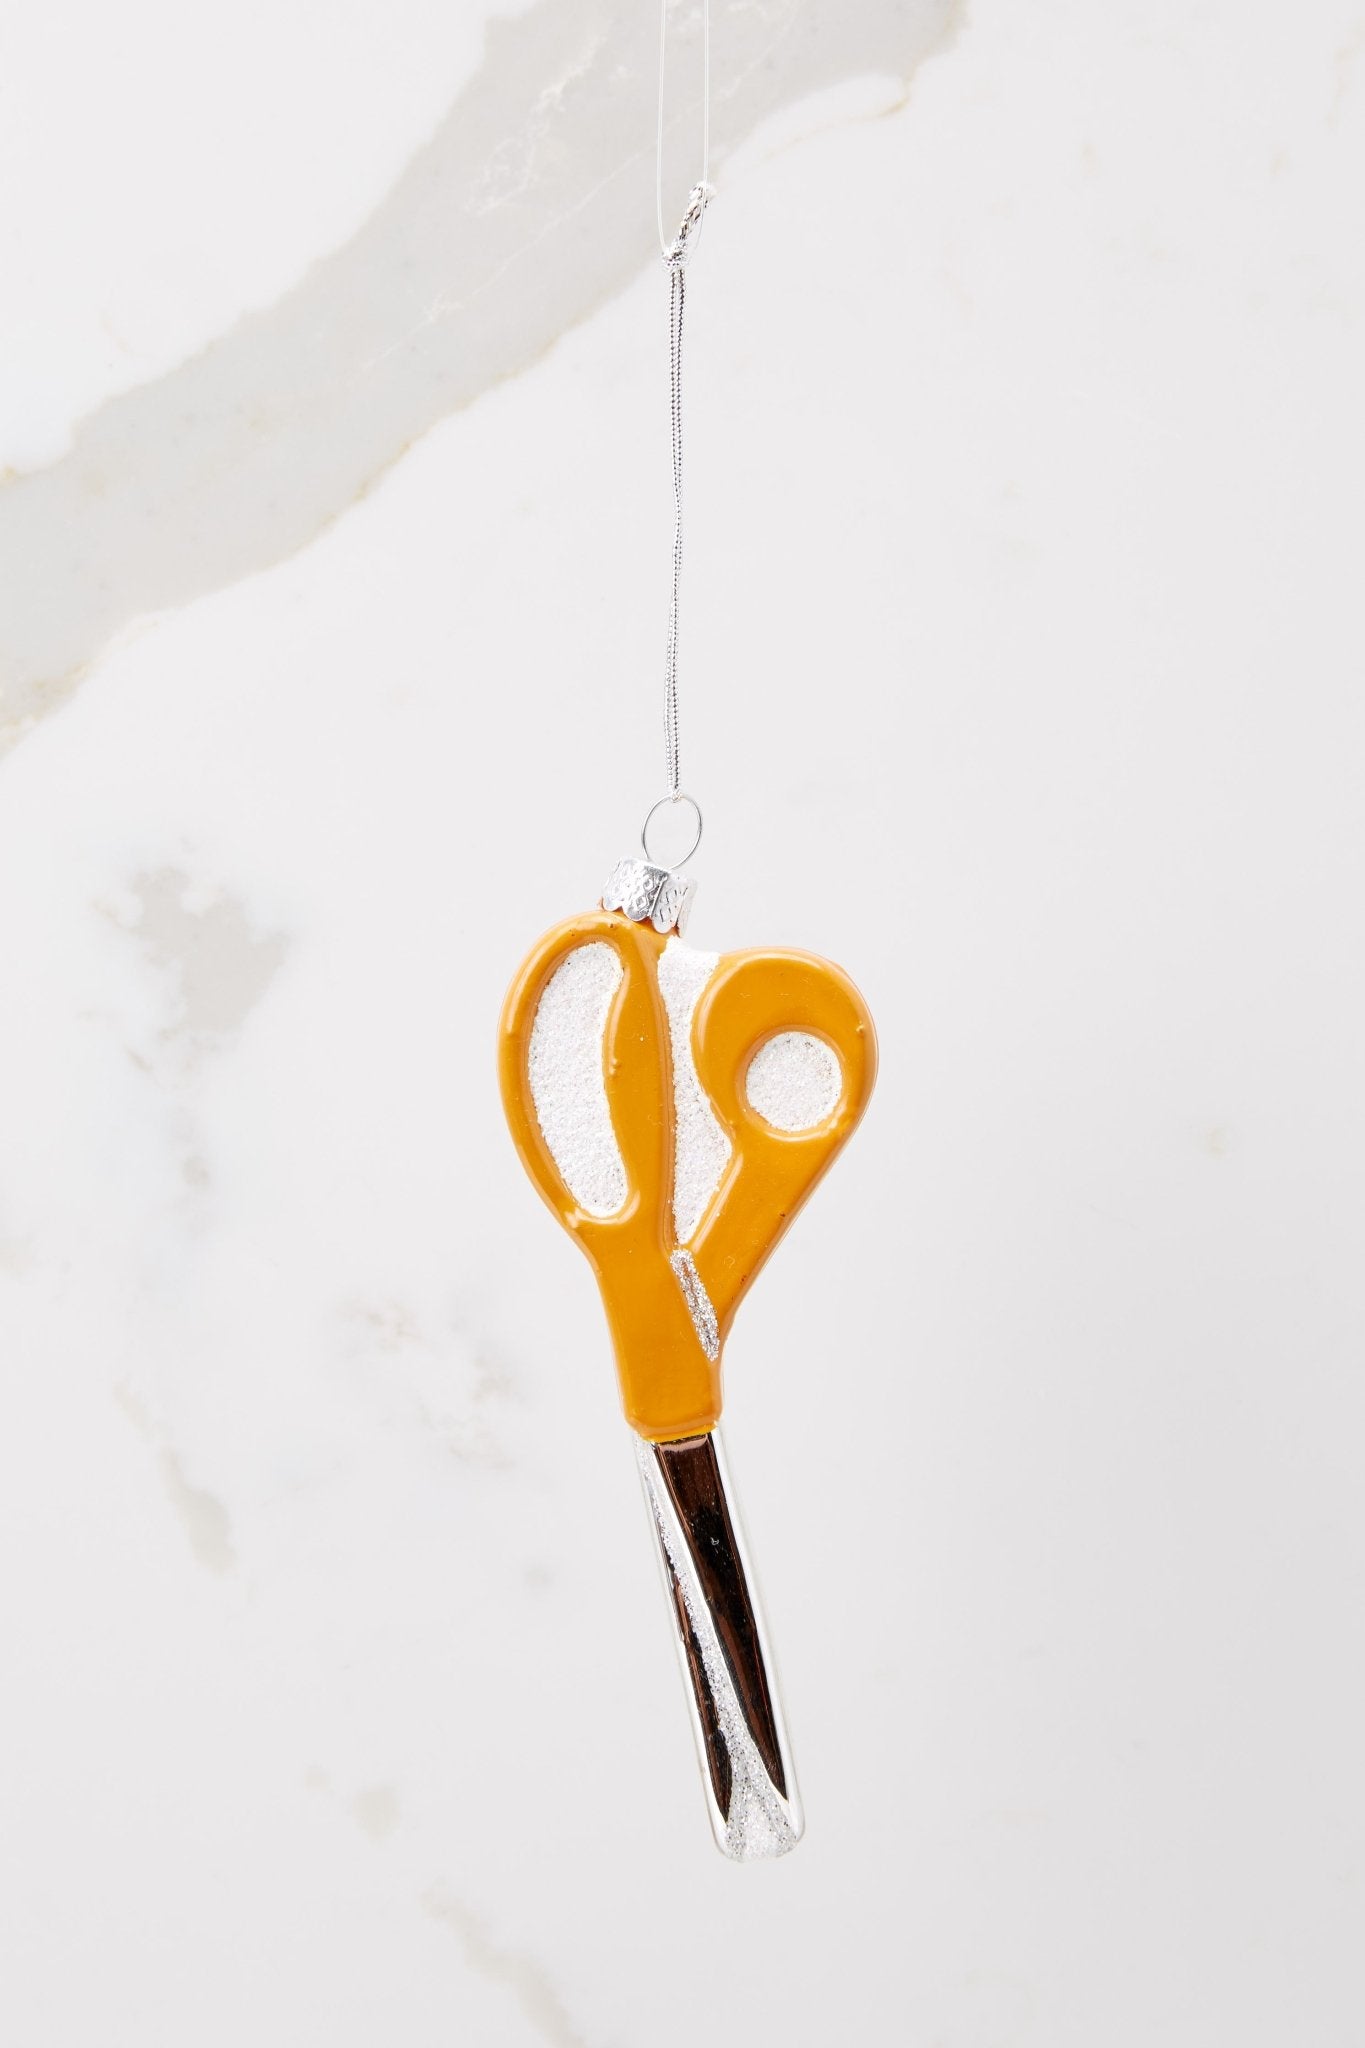 Back view of this ornament that features orange scissors.